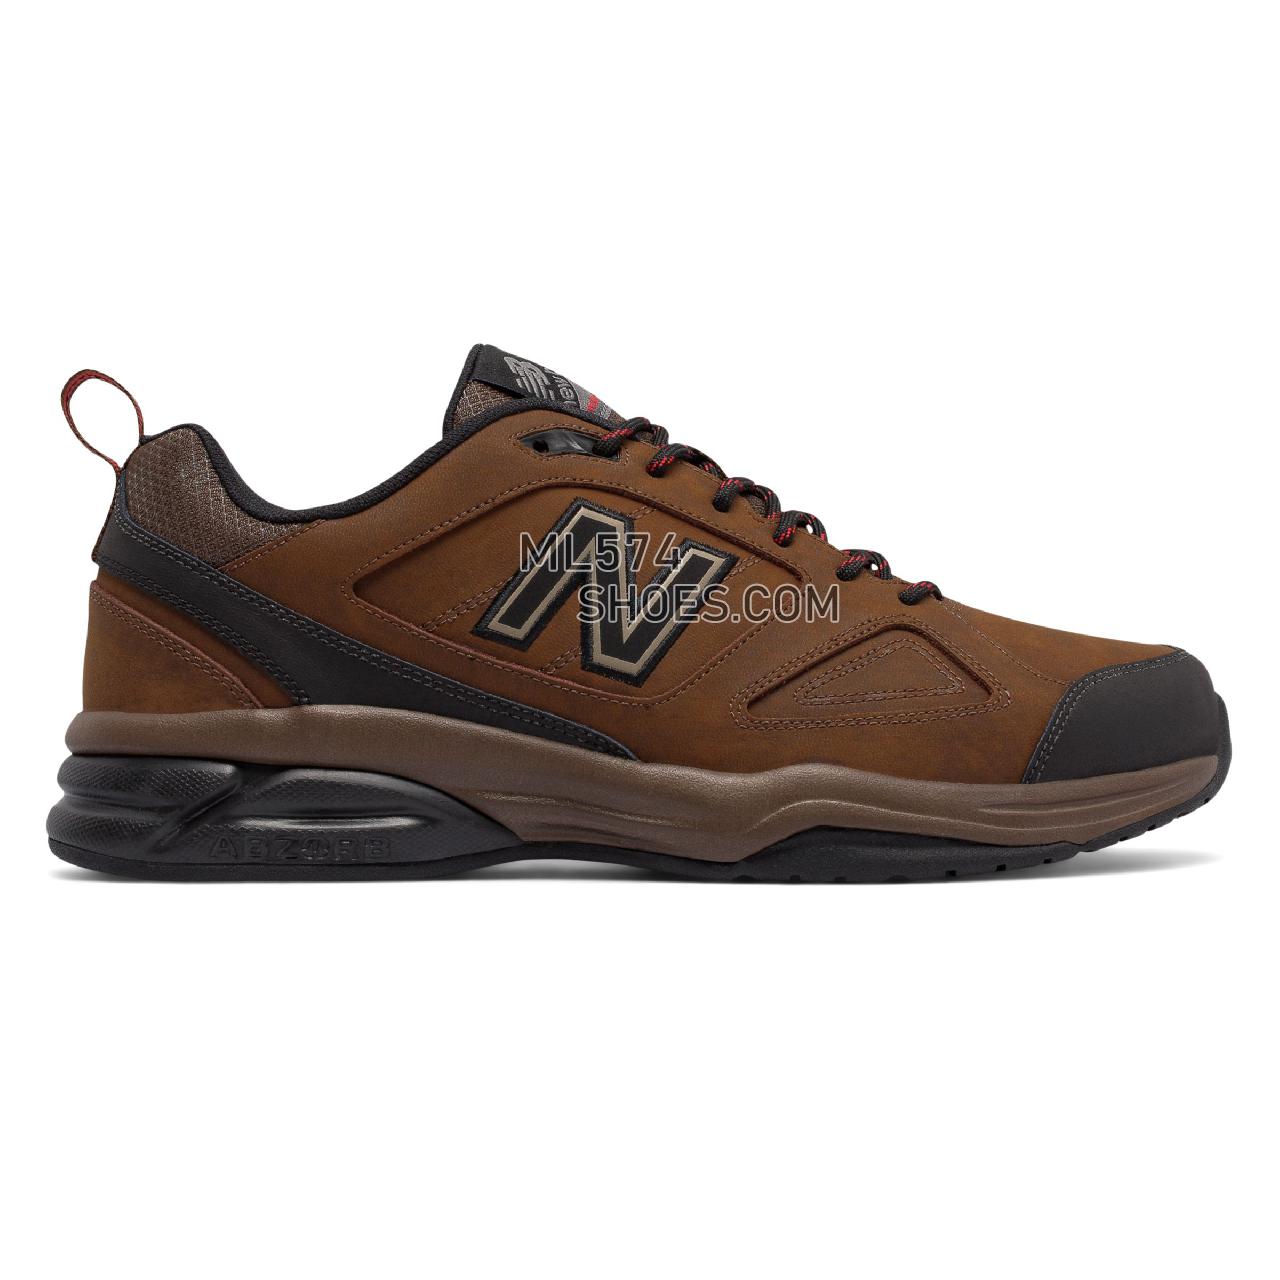 New Balance New Balance 623v3 Trainer Leather - Men's 623 - X-training Brown with Brown - MX623LT3